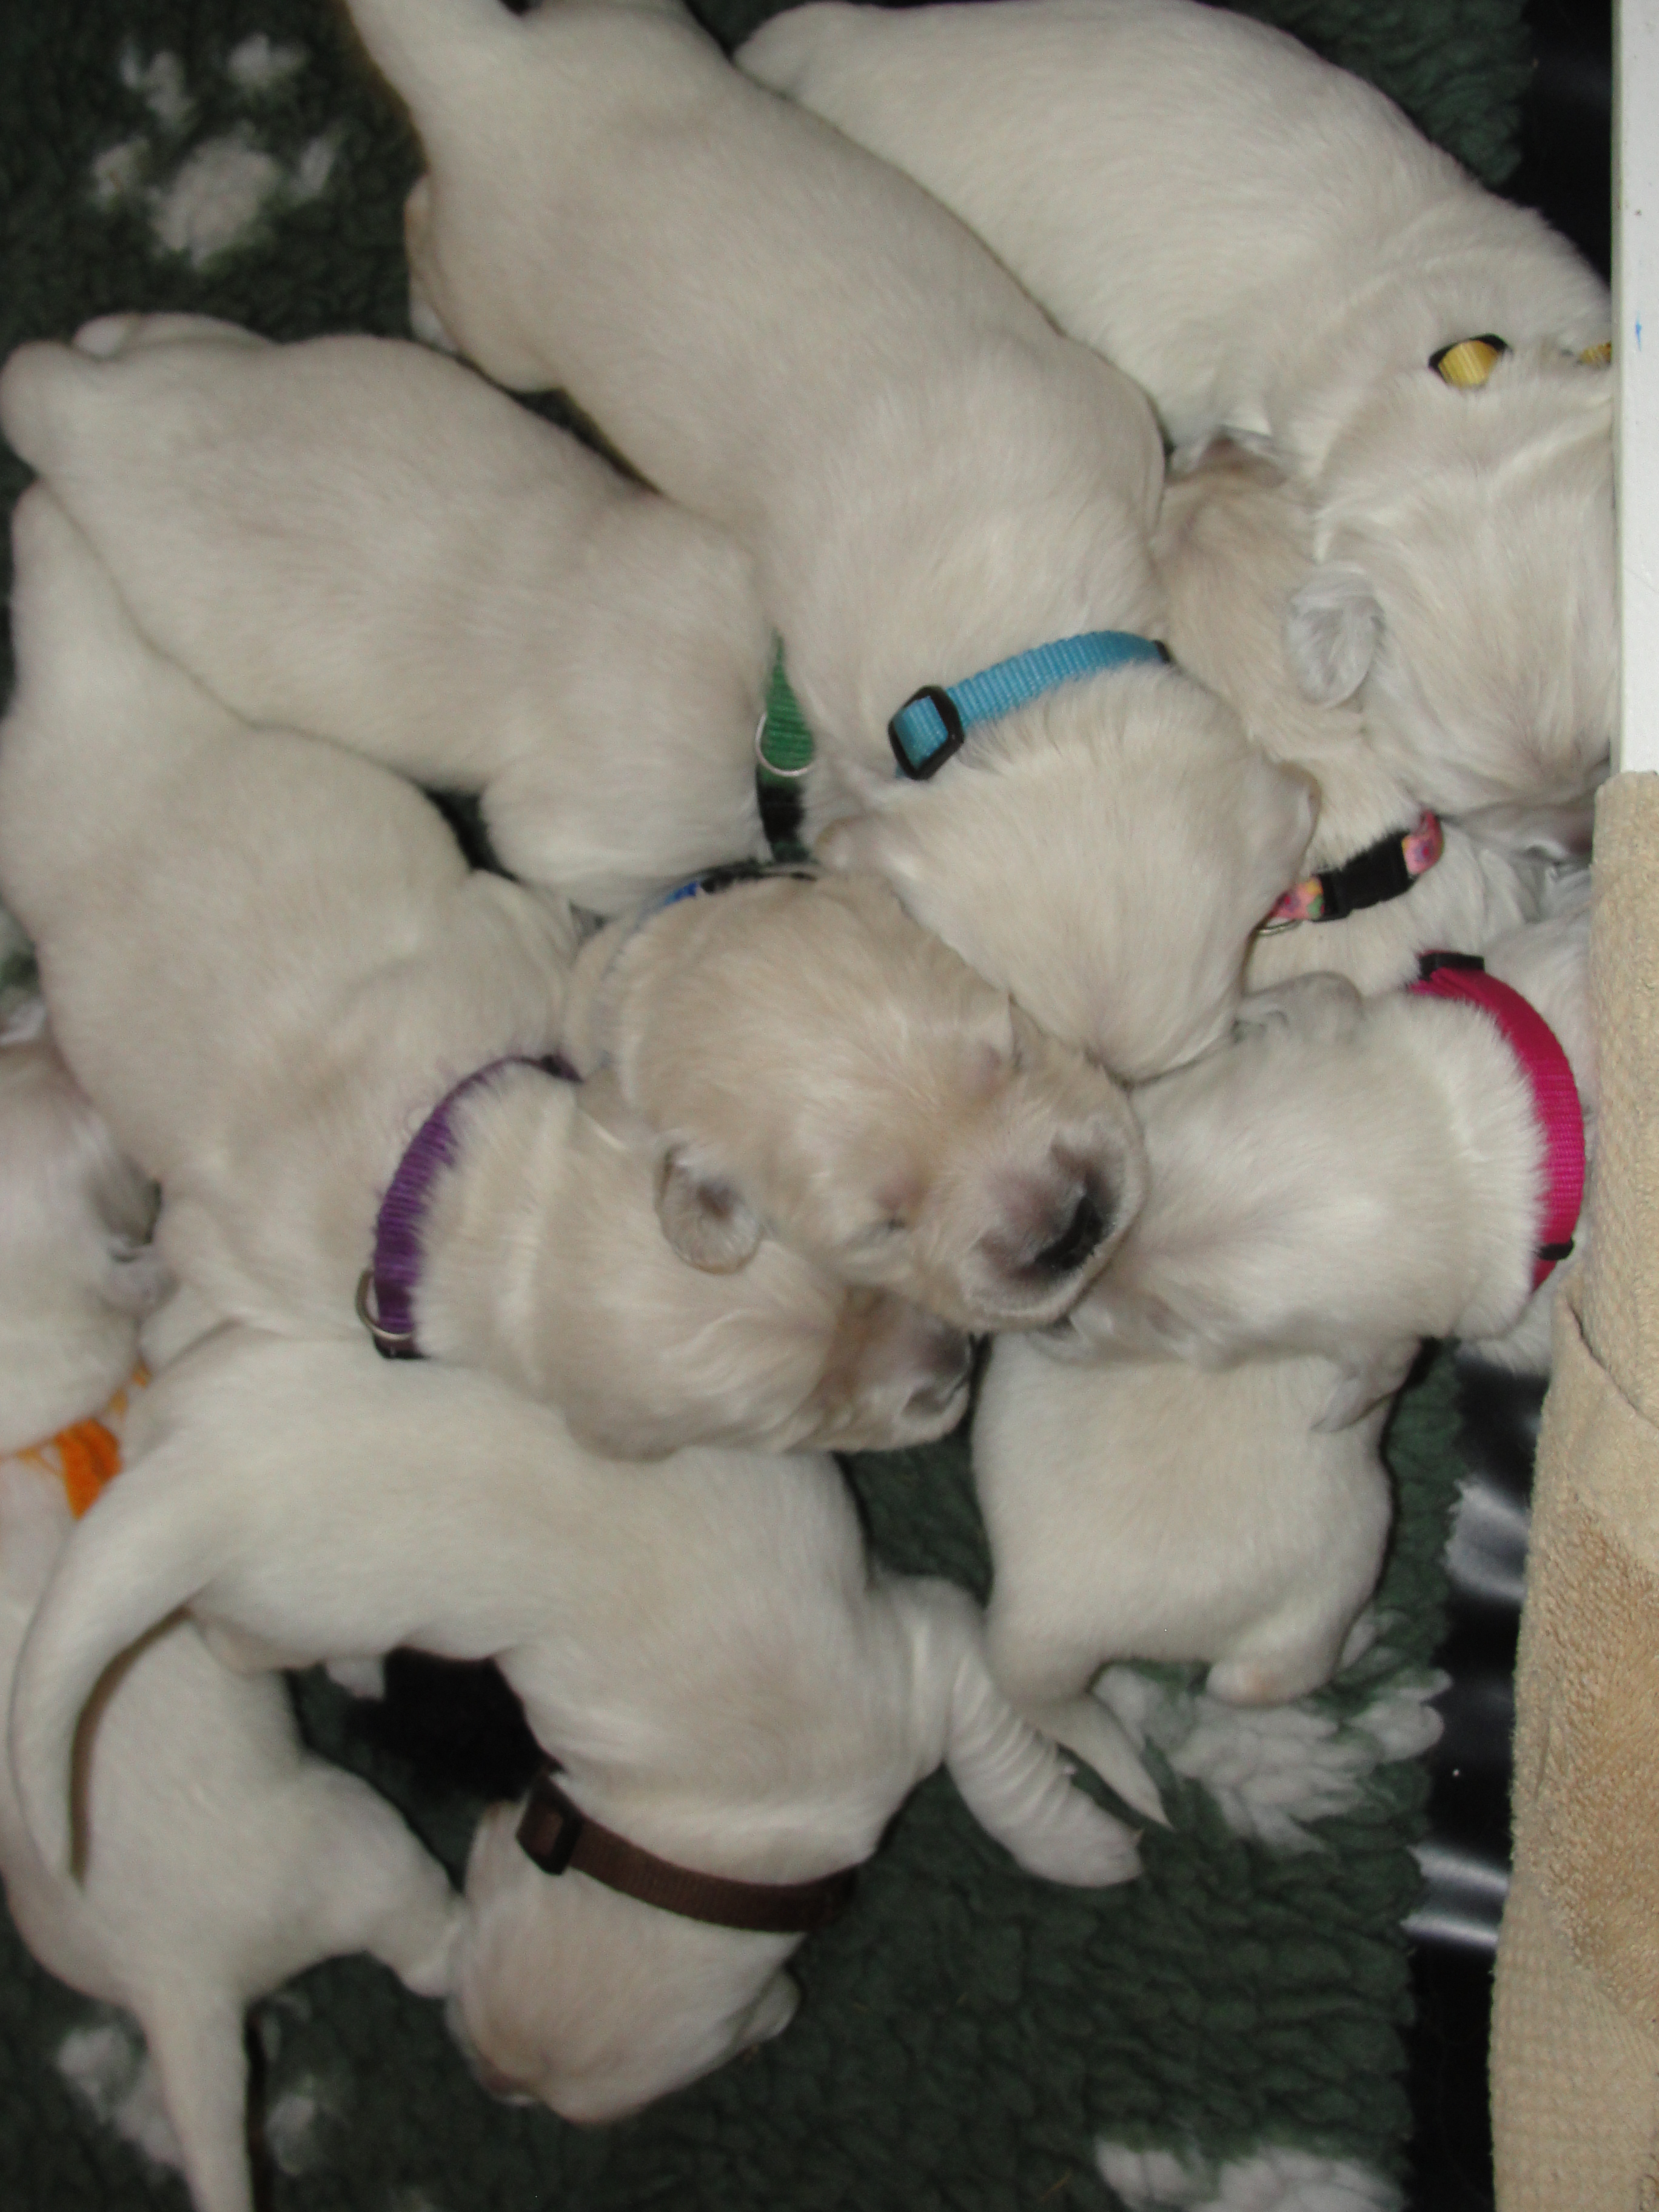 12 day old puppies.